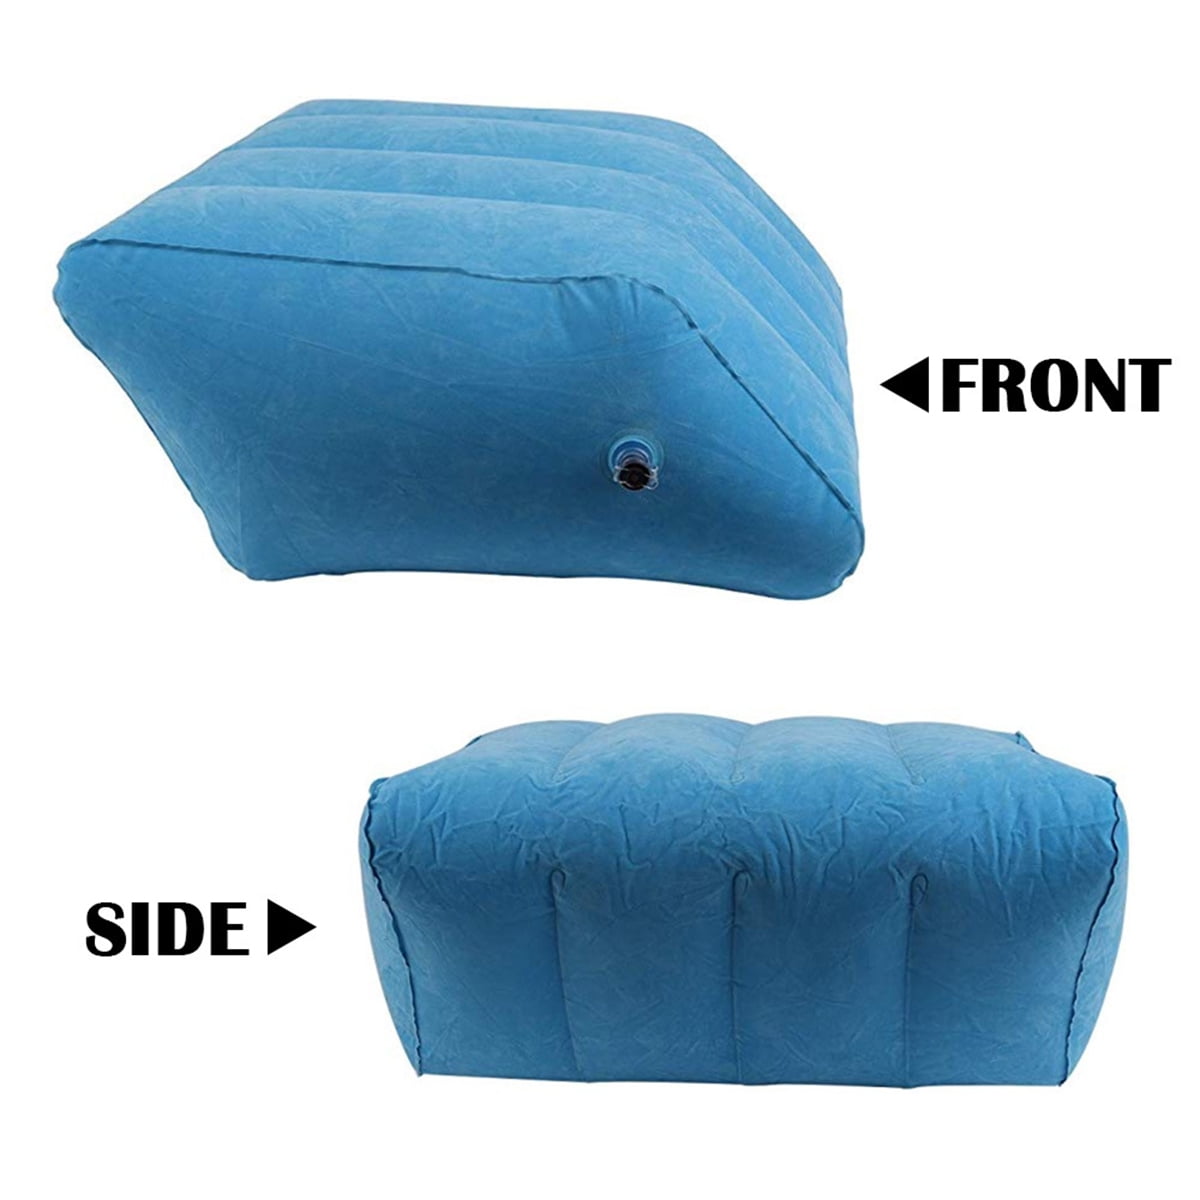 Luxury Inflatable Travel Wedge Bed Pillow Cushion Back Support FootRest Portable 